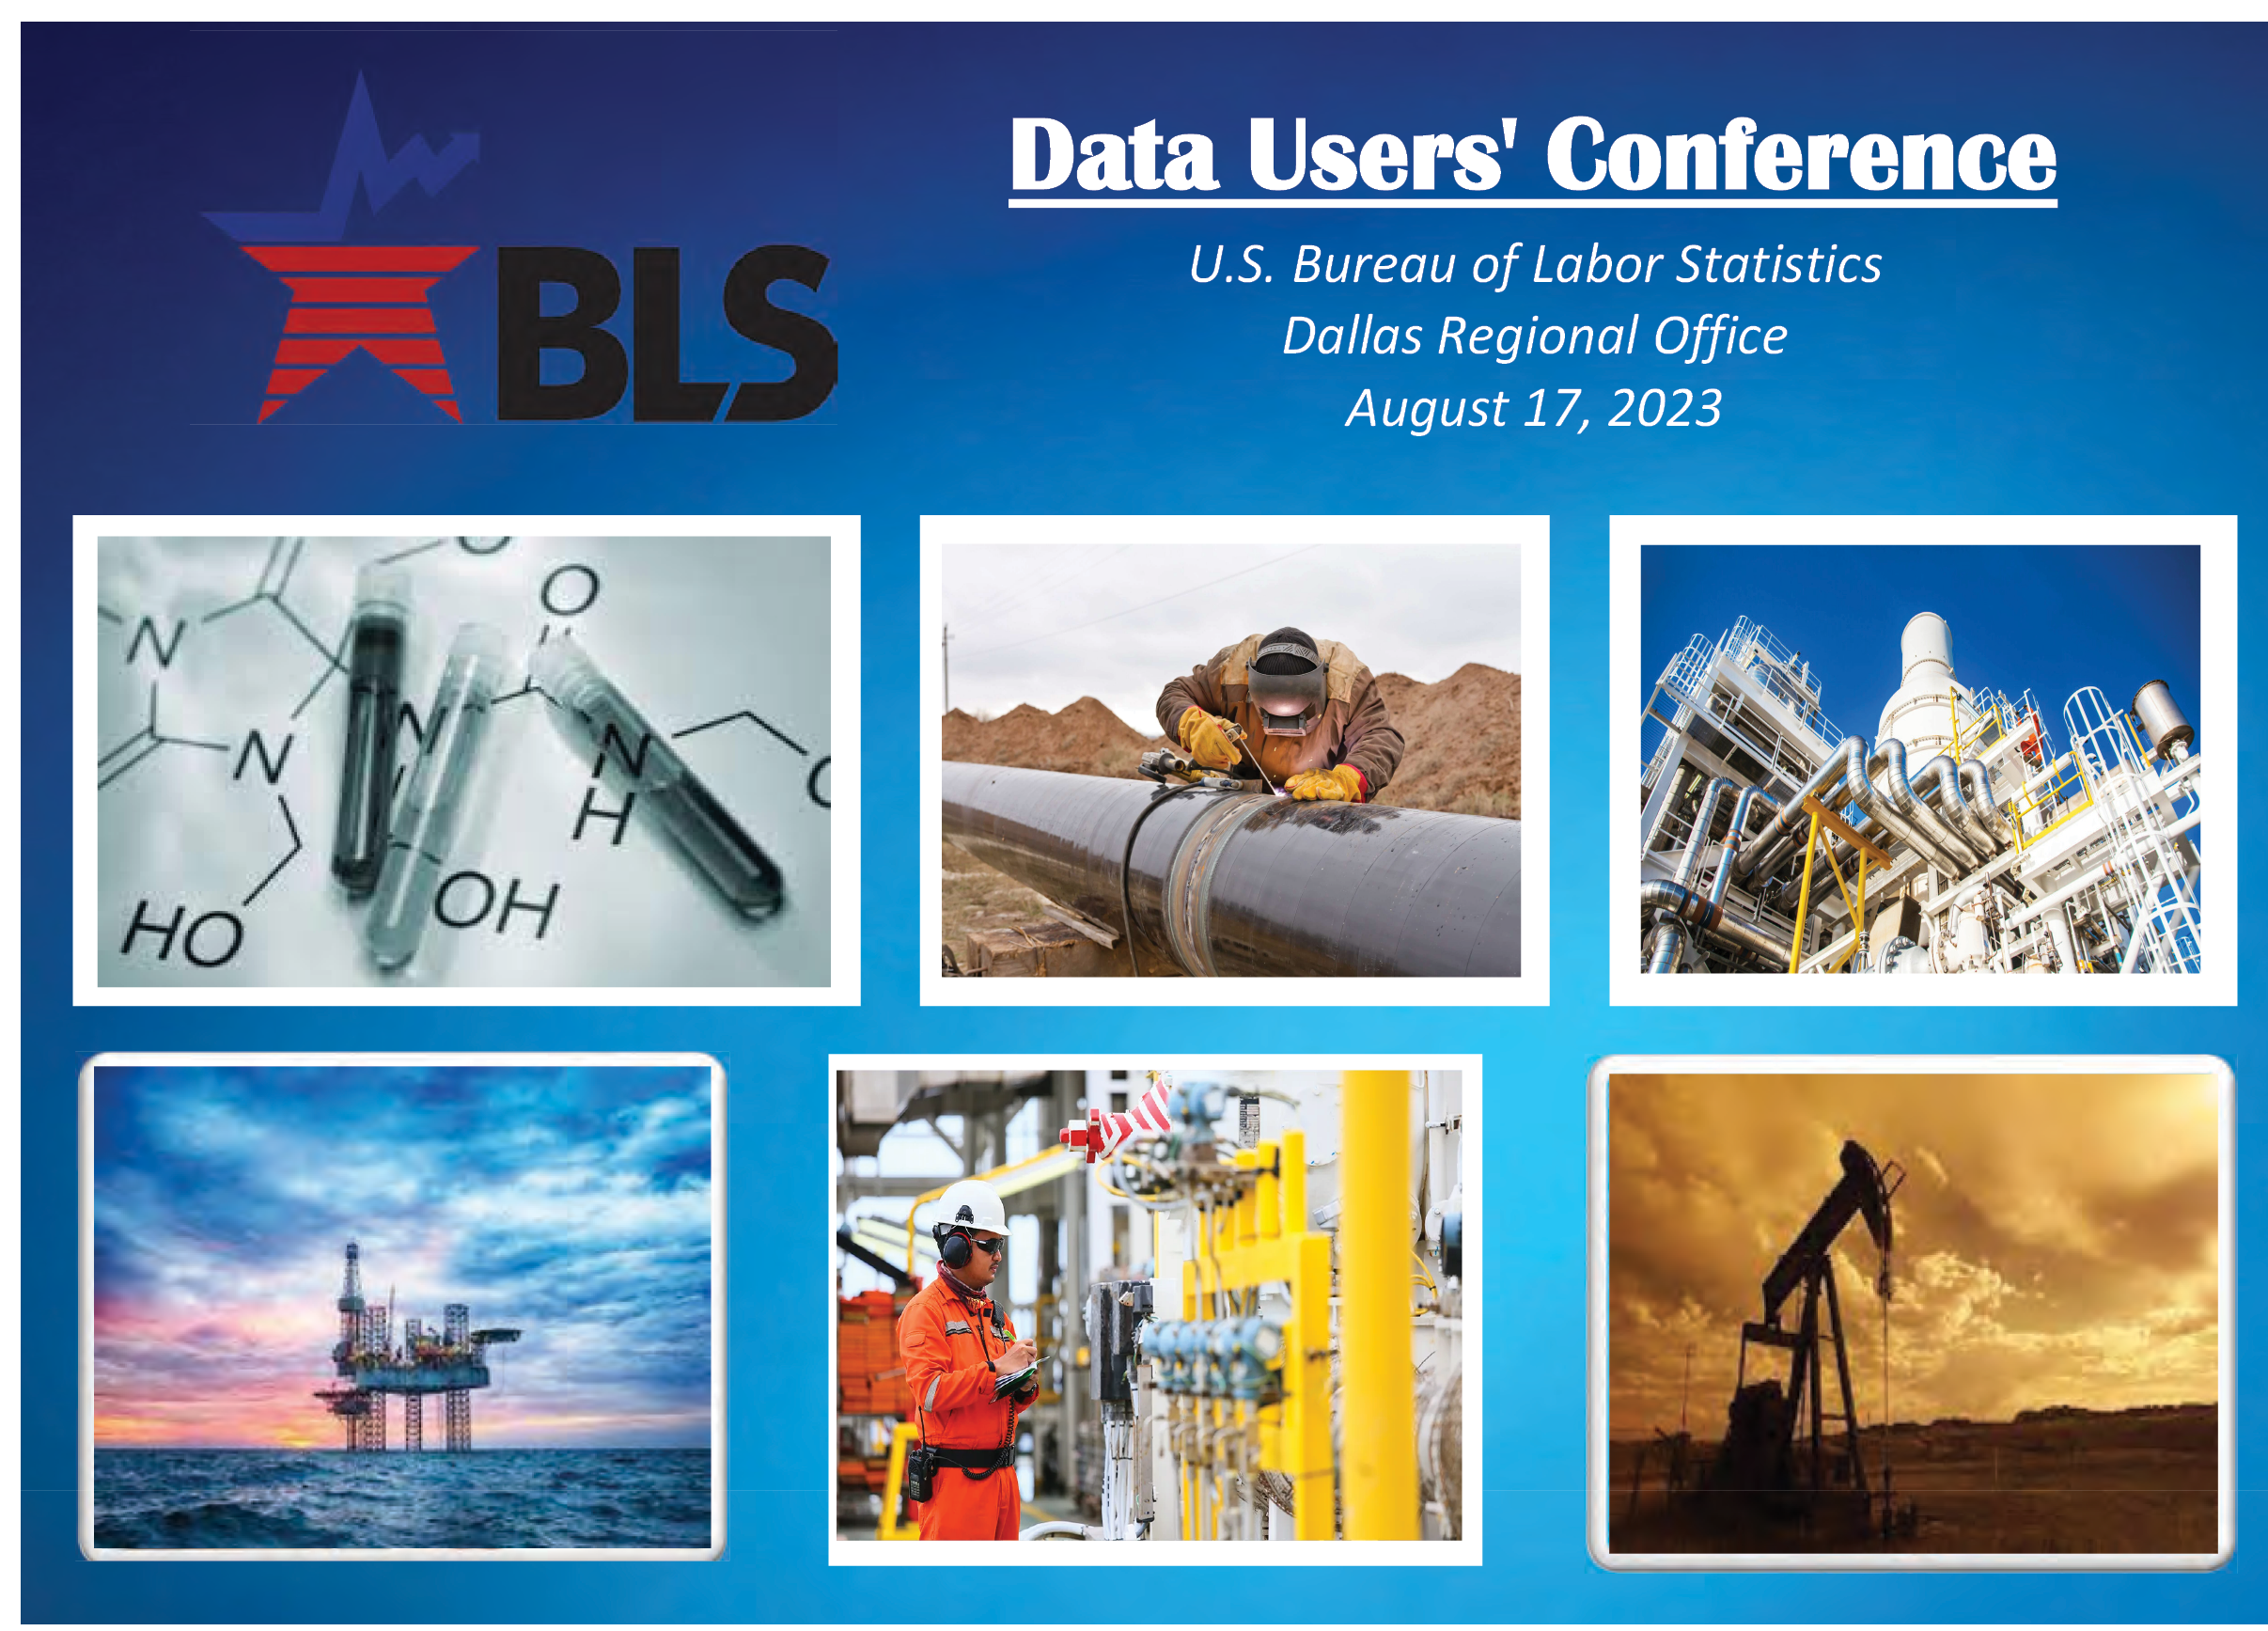 BLS Data Users conference text with six photos of oil and gas scenes on a blue background